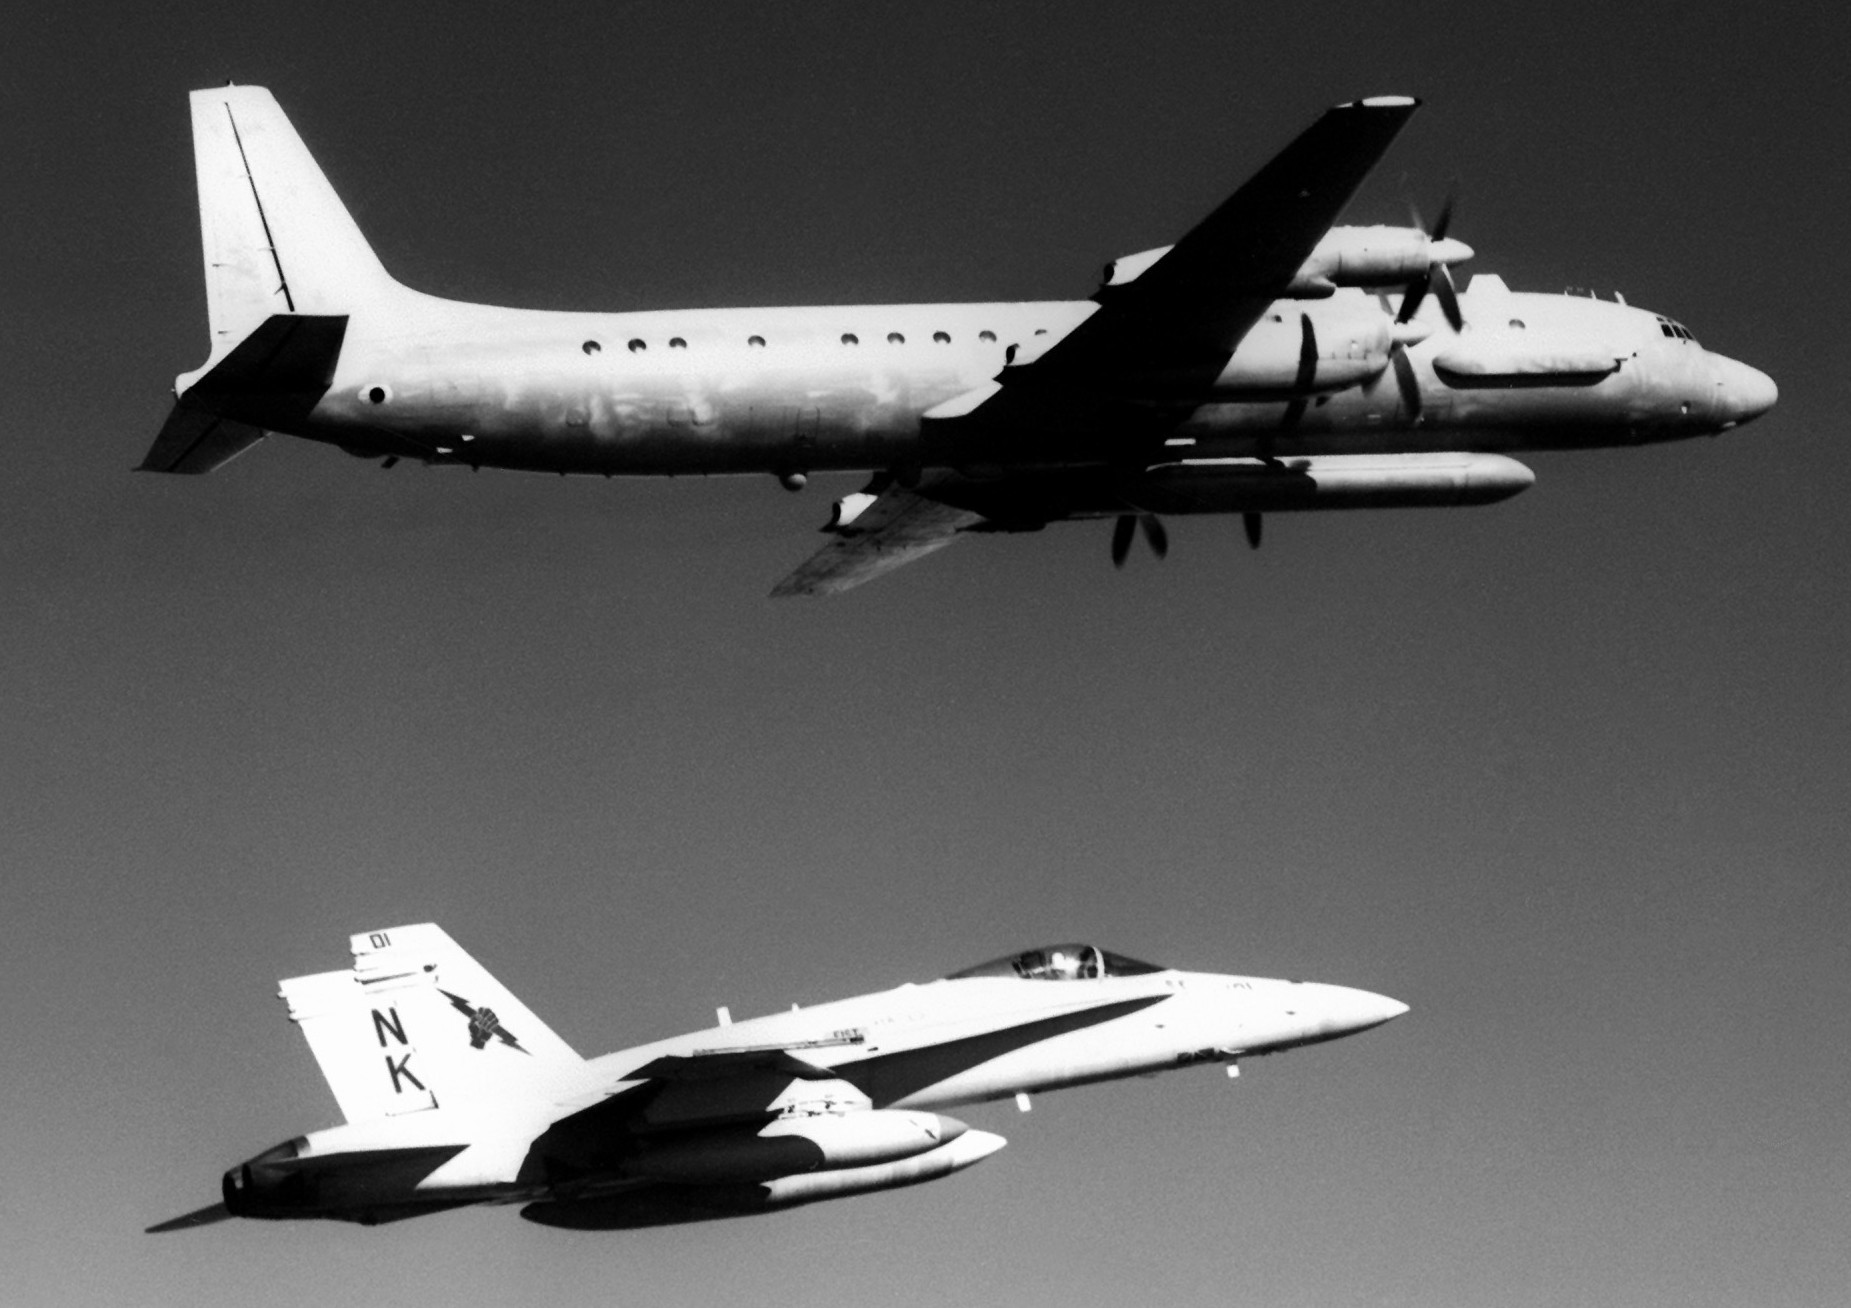 vfa-25 fist of the fleet f/a-18c hornet escorting soviet il-20 coot-a electronic reconnaissance aircraft